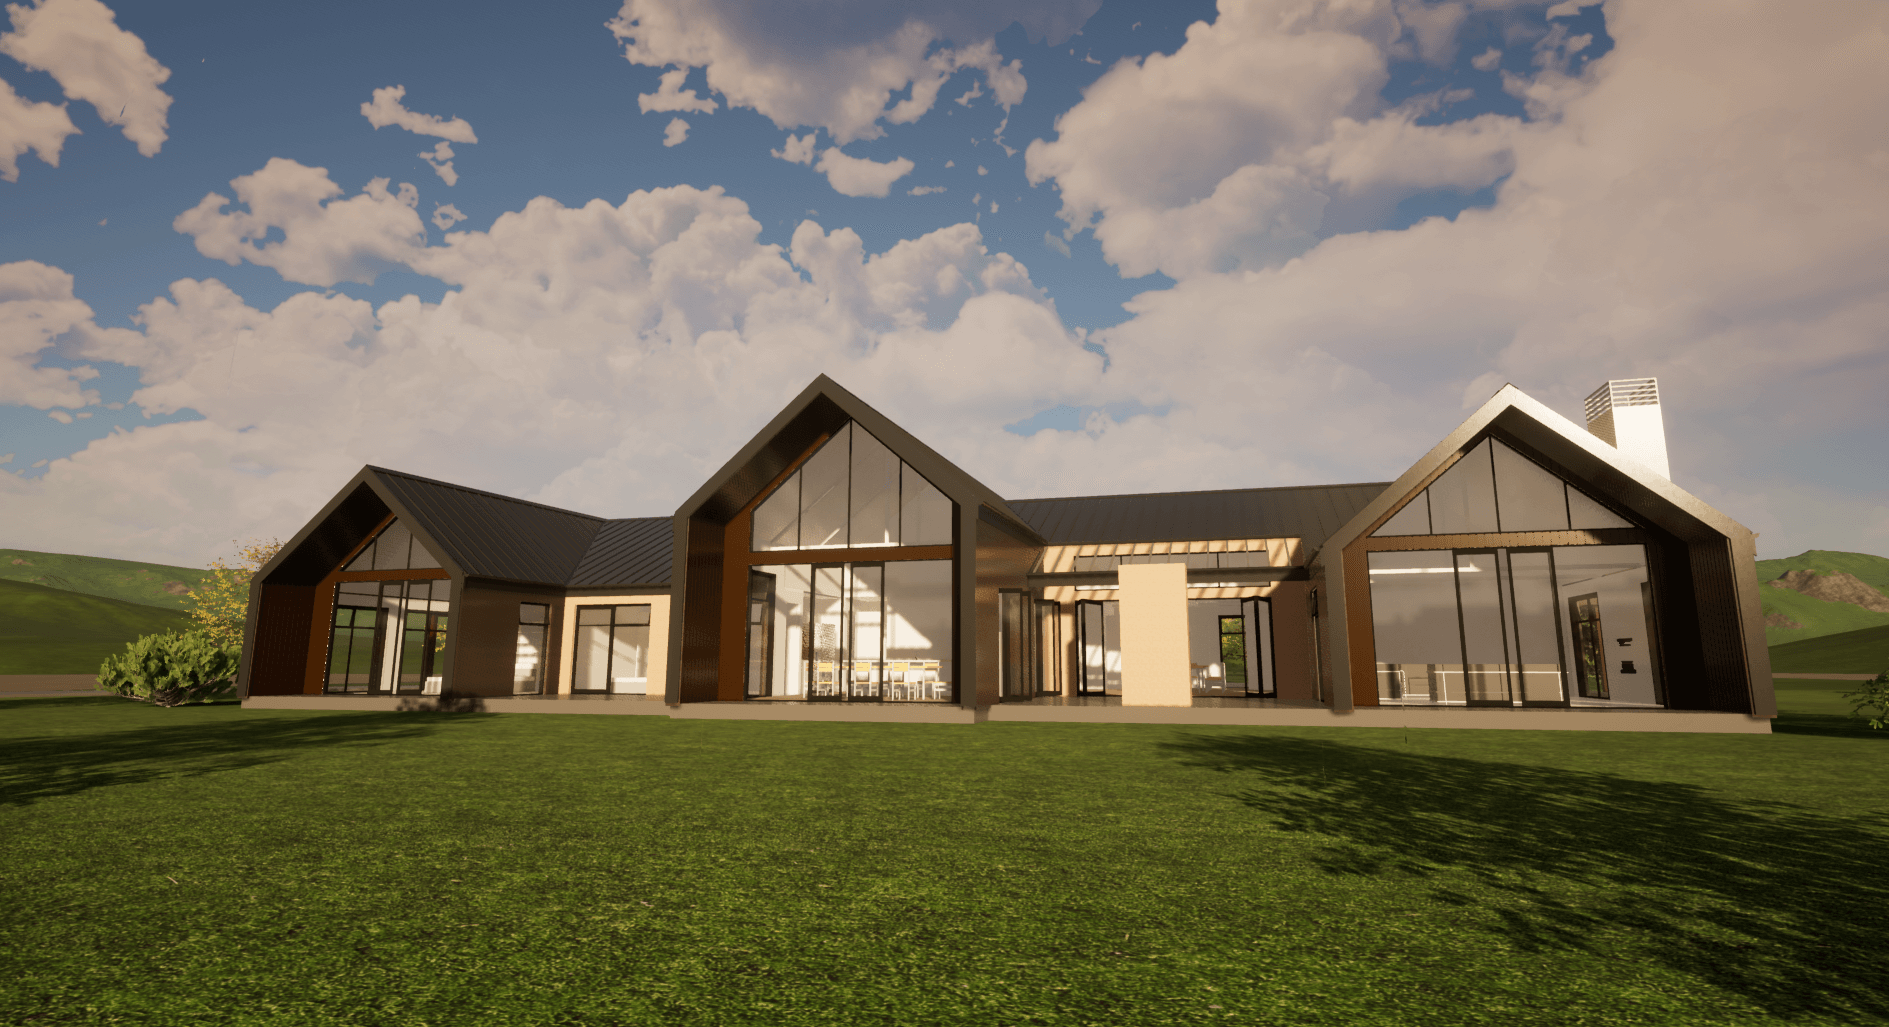 rendered autoCAD house design by arcline architecture, dark exterior with sky and grass